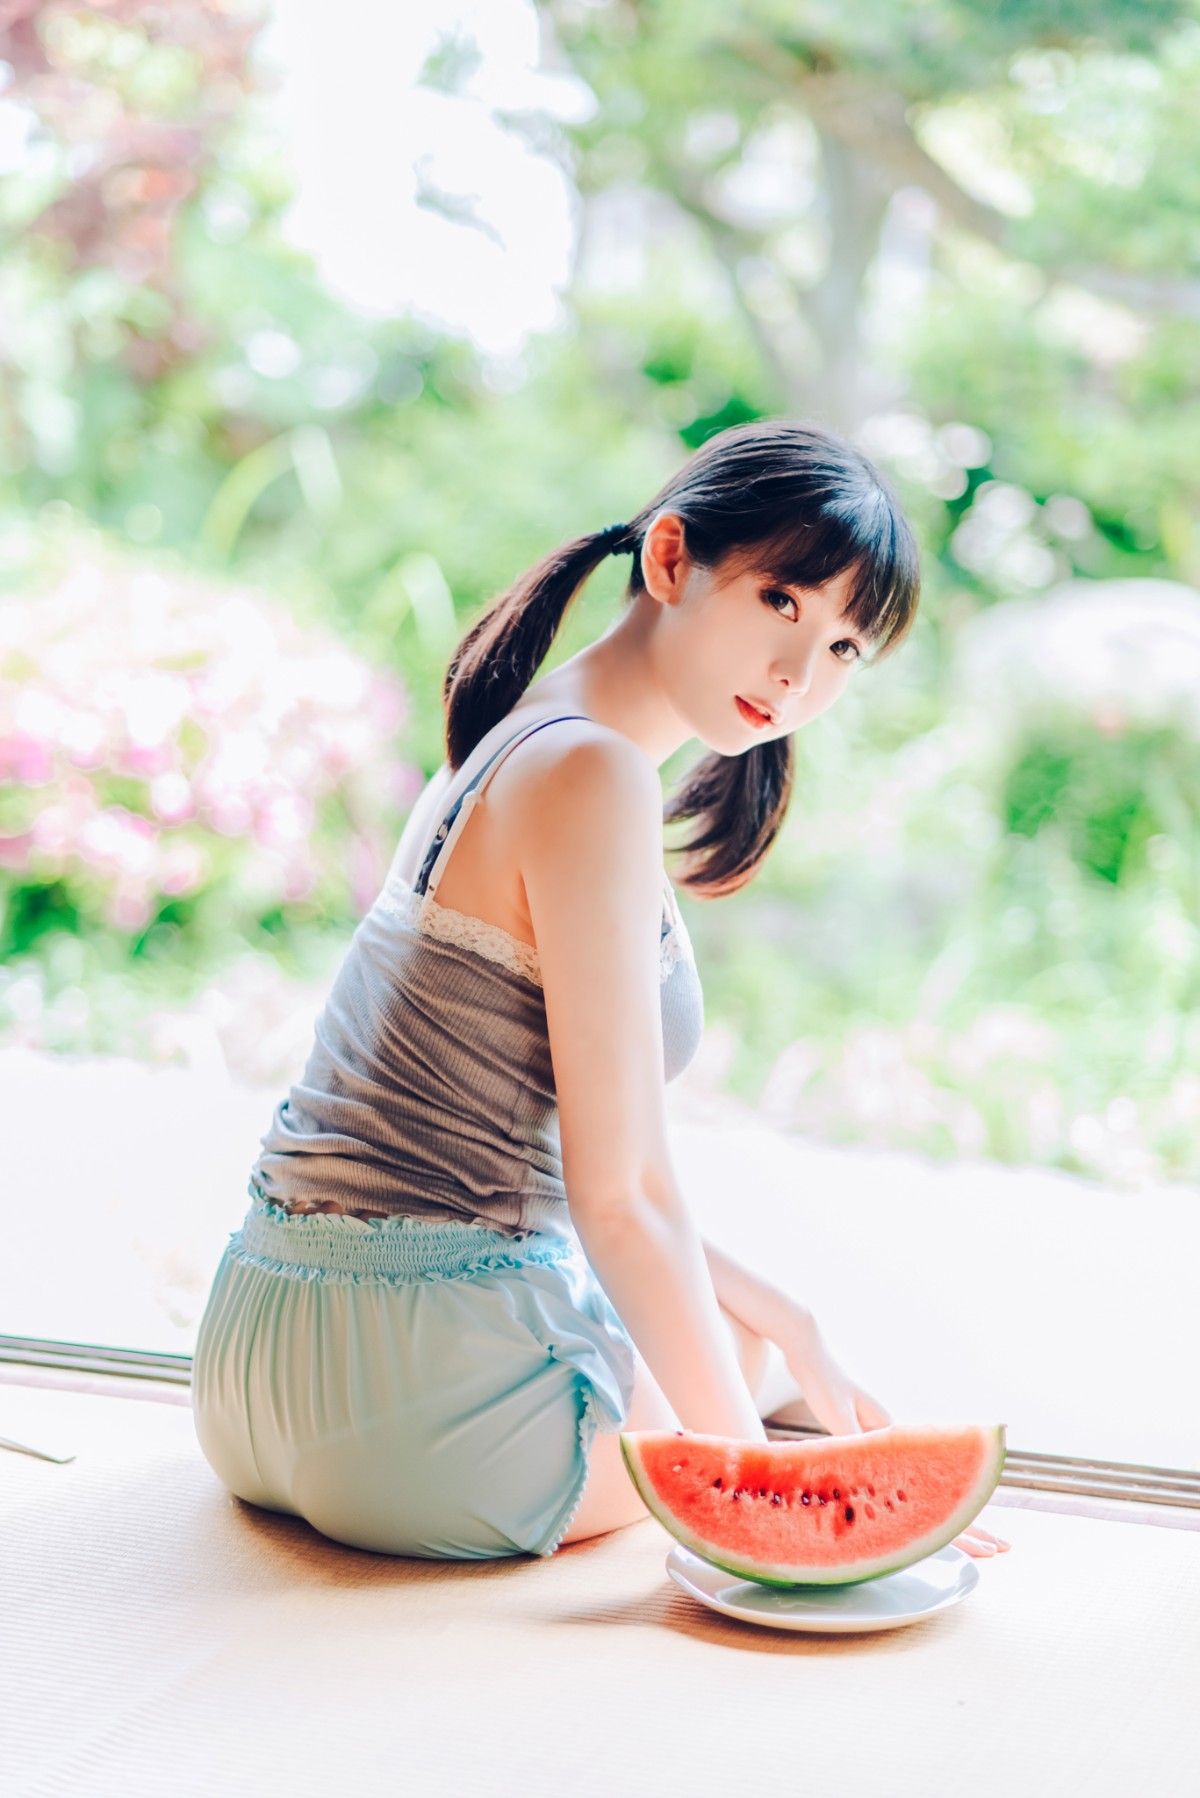 Coser@霜月shimo Vol.004 Summer 0022 8756089204